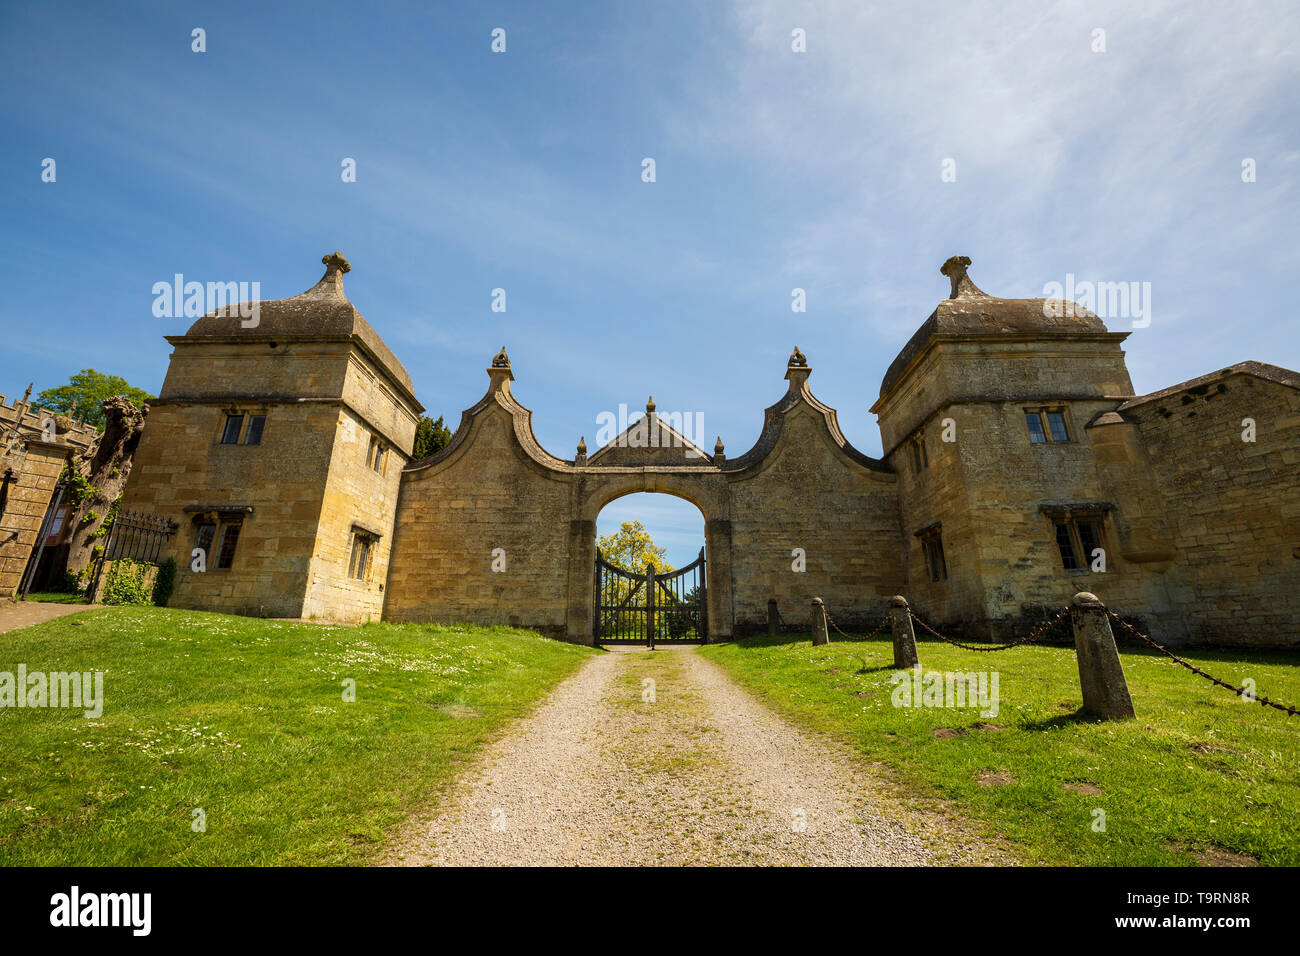 The Grade II listed entrance gates to Old Campden House in Chipping Campden, Gloucestershire, England Stock Photo